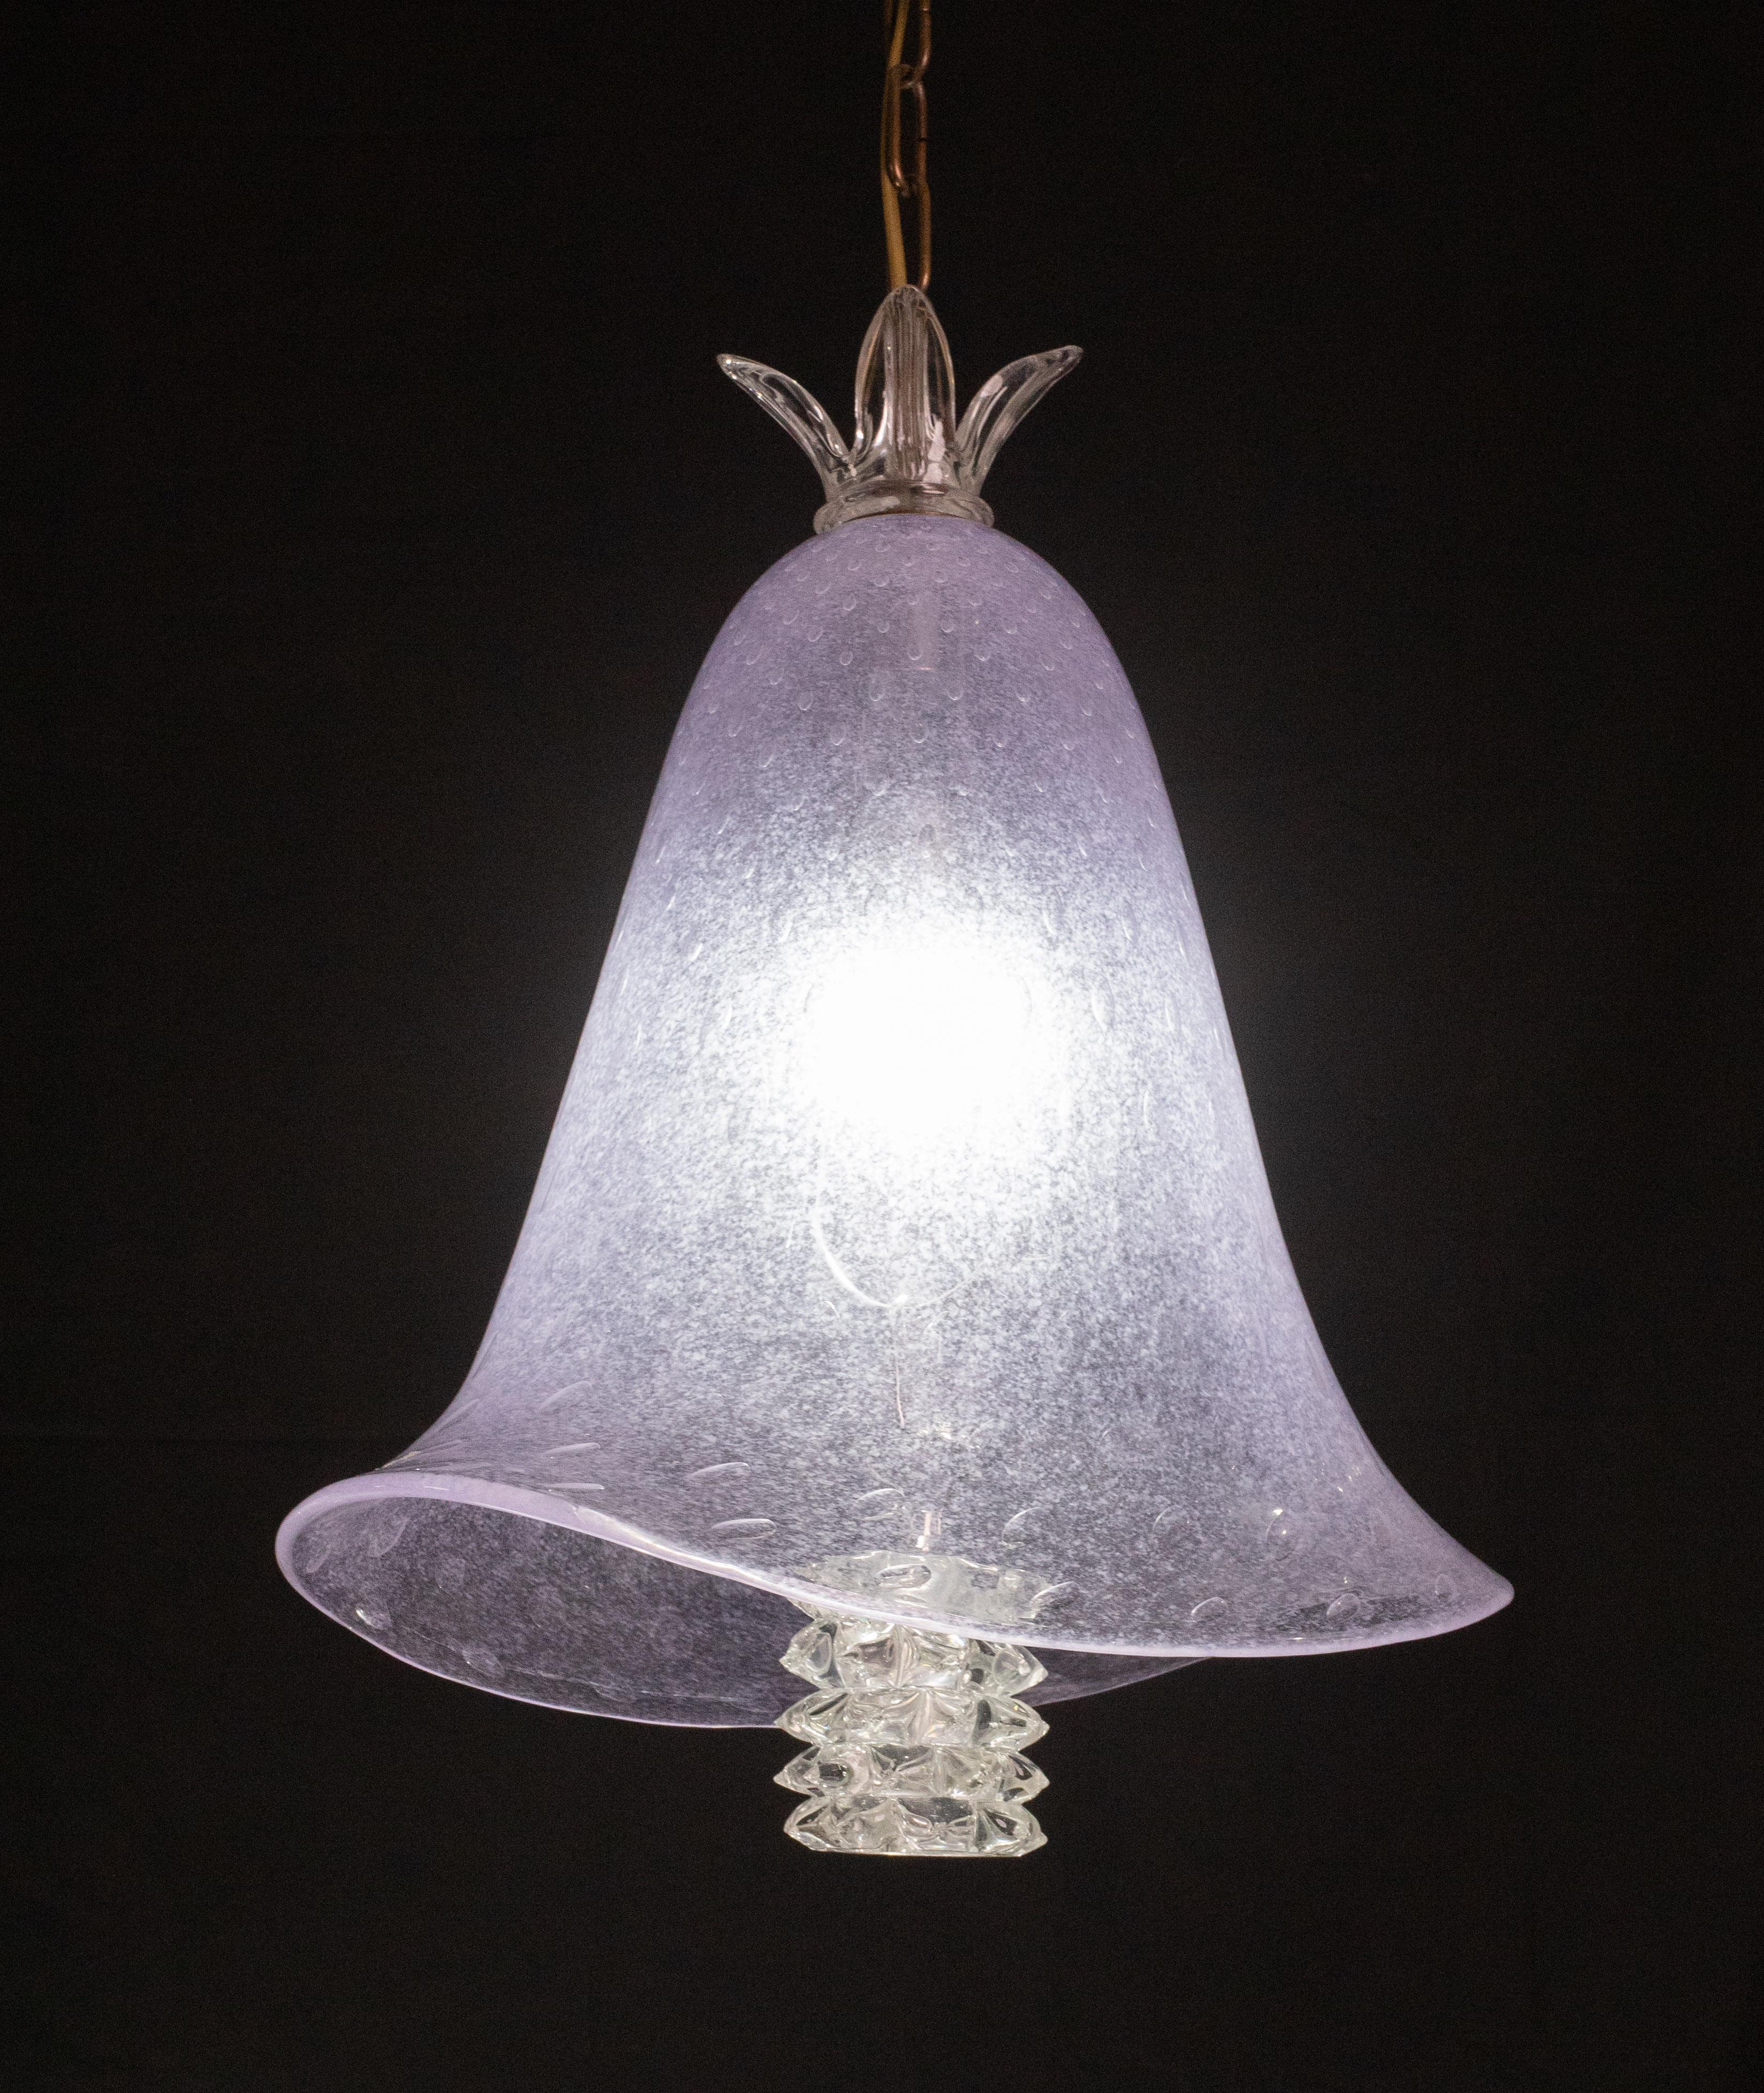 Extraordinary Murano chandelier Made by the Barovier and Toso glassworks, documented by signature on the light.

The lantern is transparent color tending to purple, glass with bubble technique, decorated with a top glass and a rostral glass element